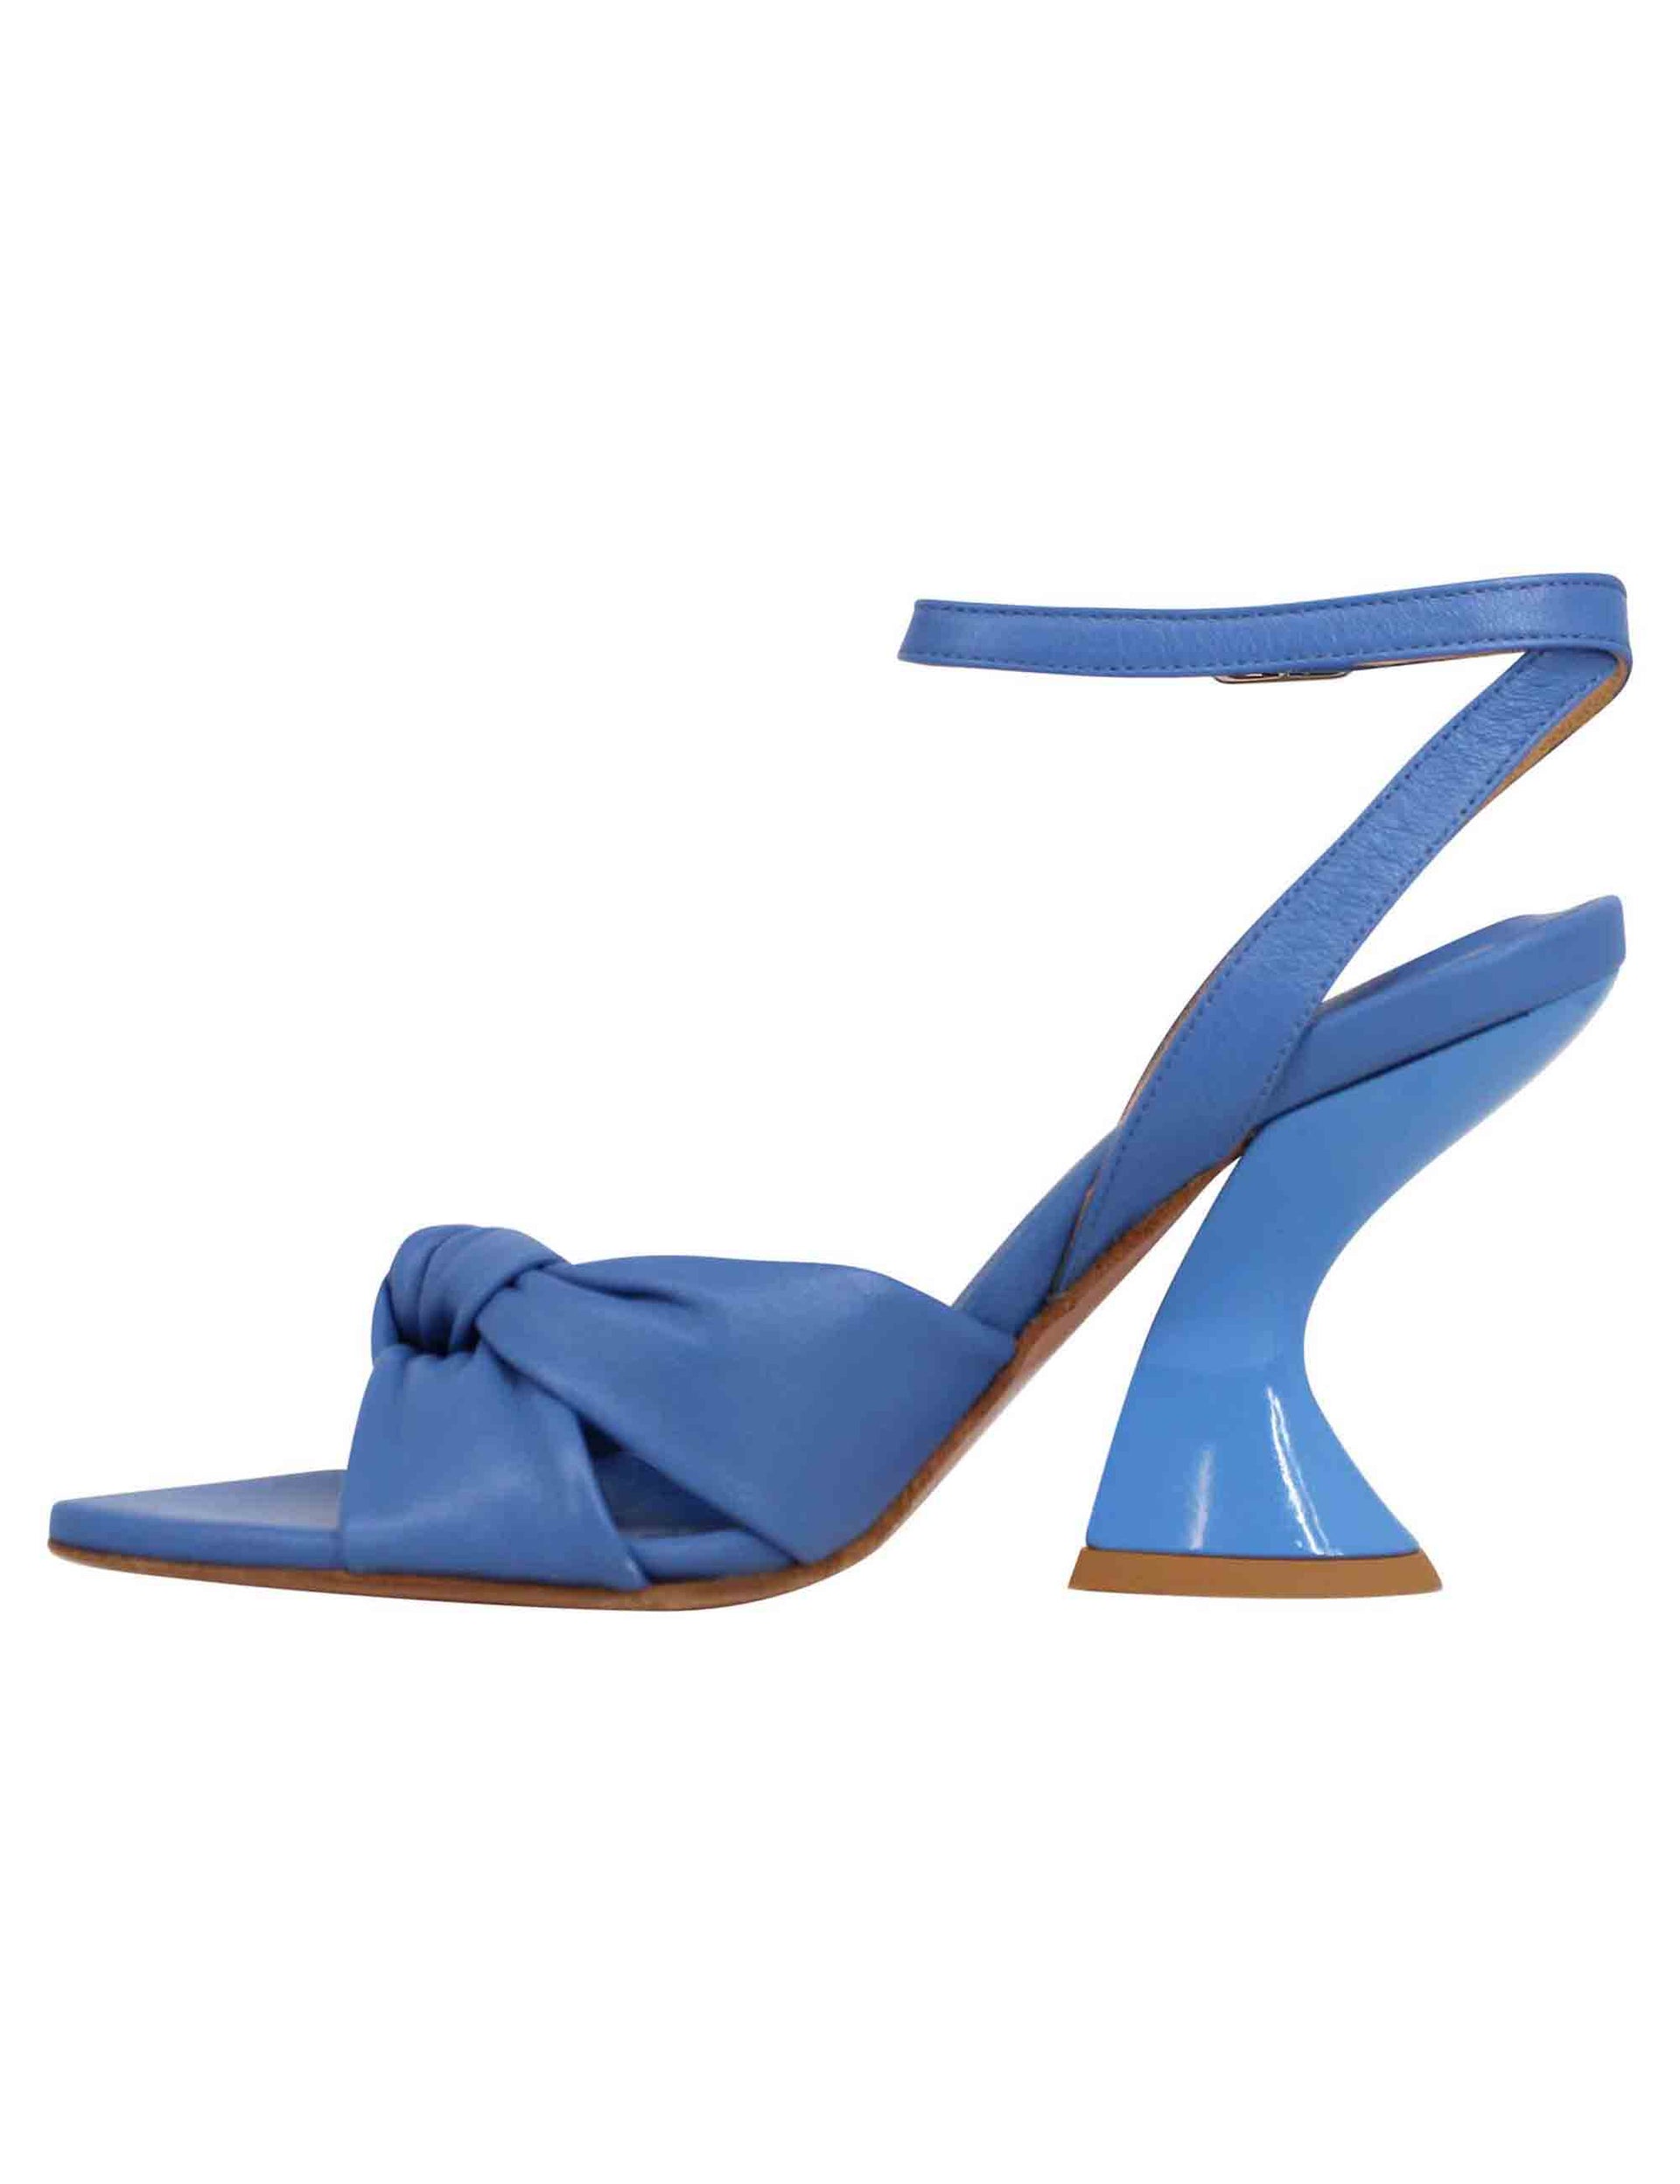 Women's blue leather sandals with high heel and ankle strap